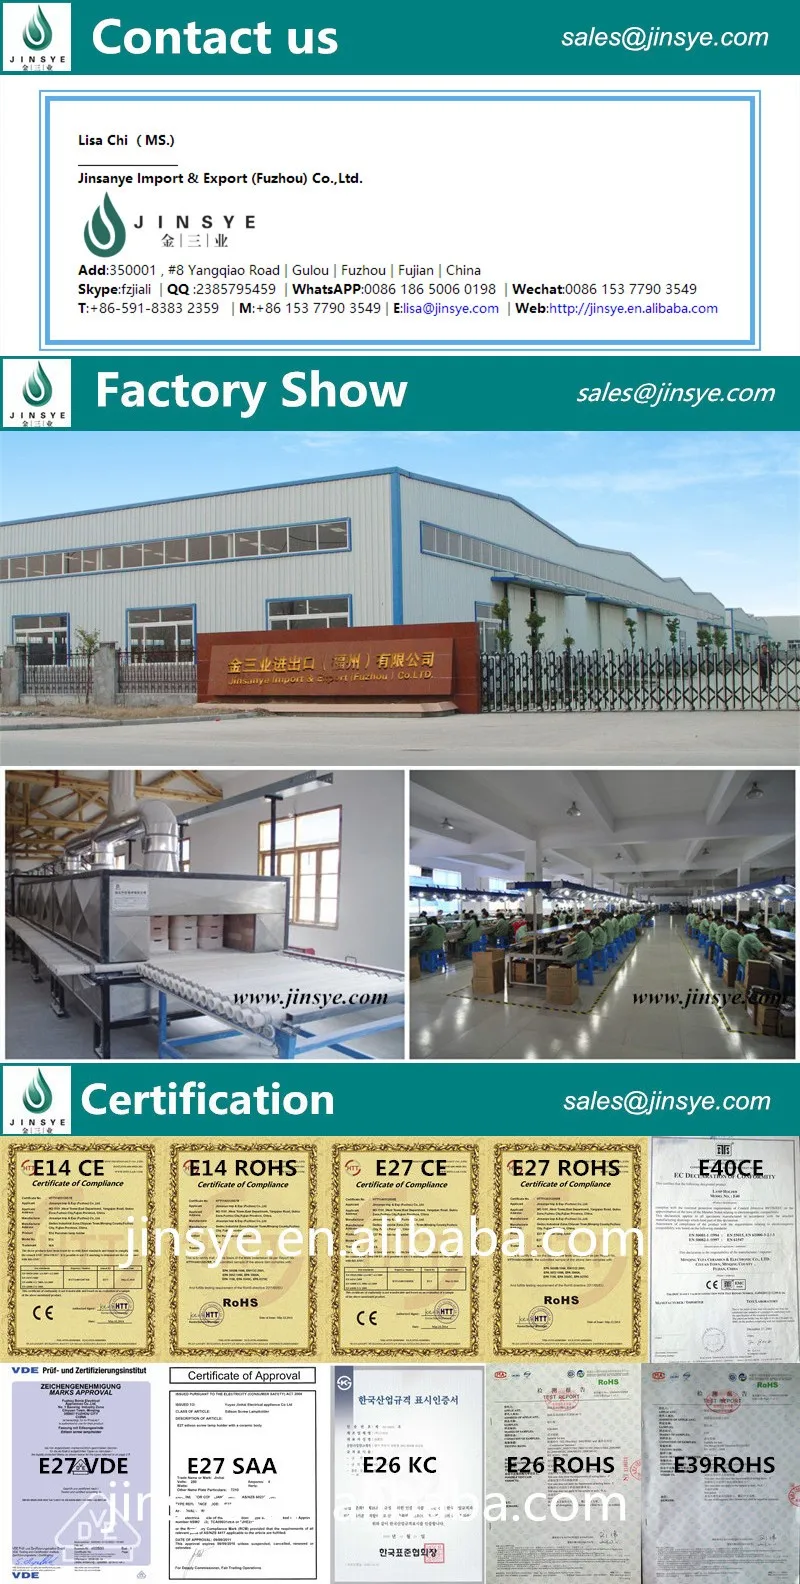 factory contact